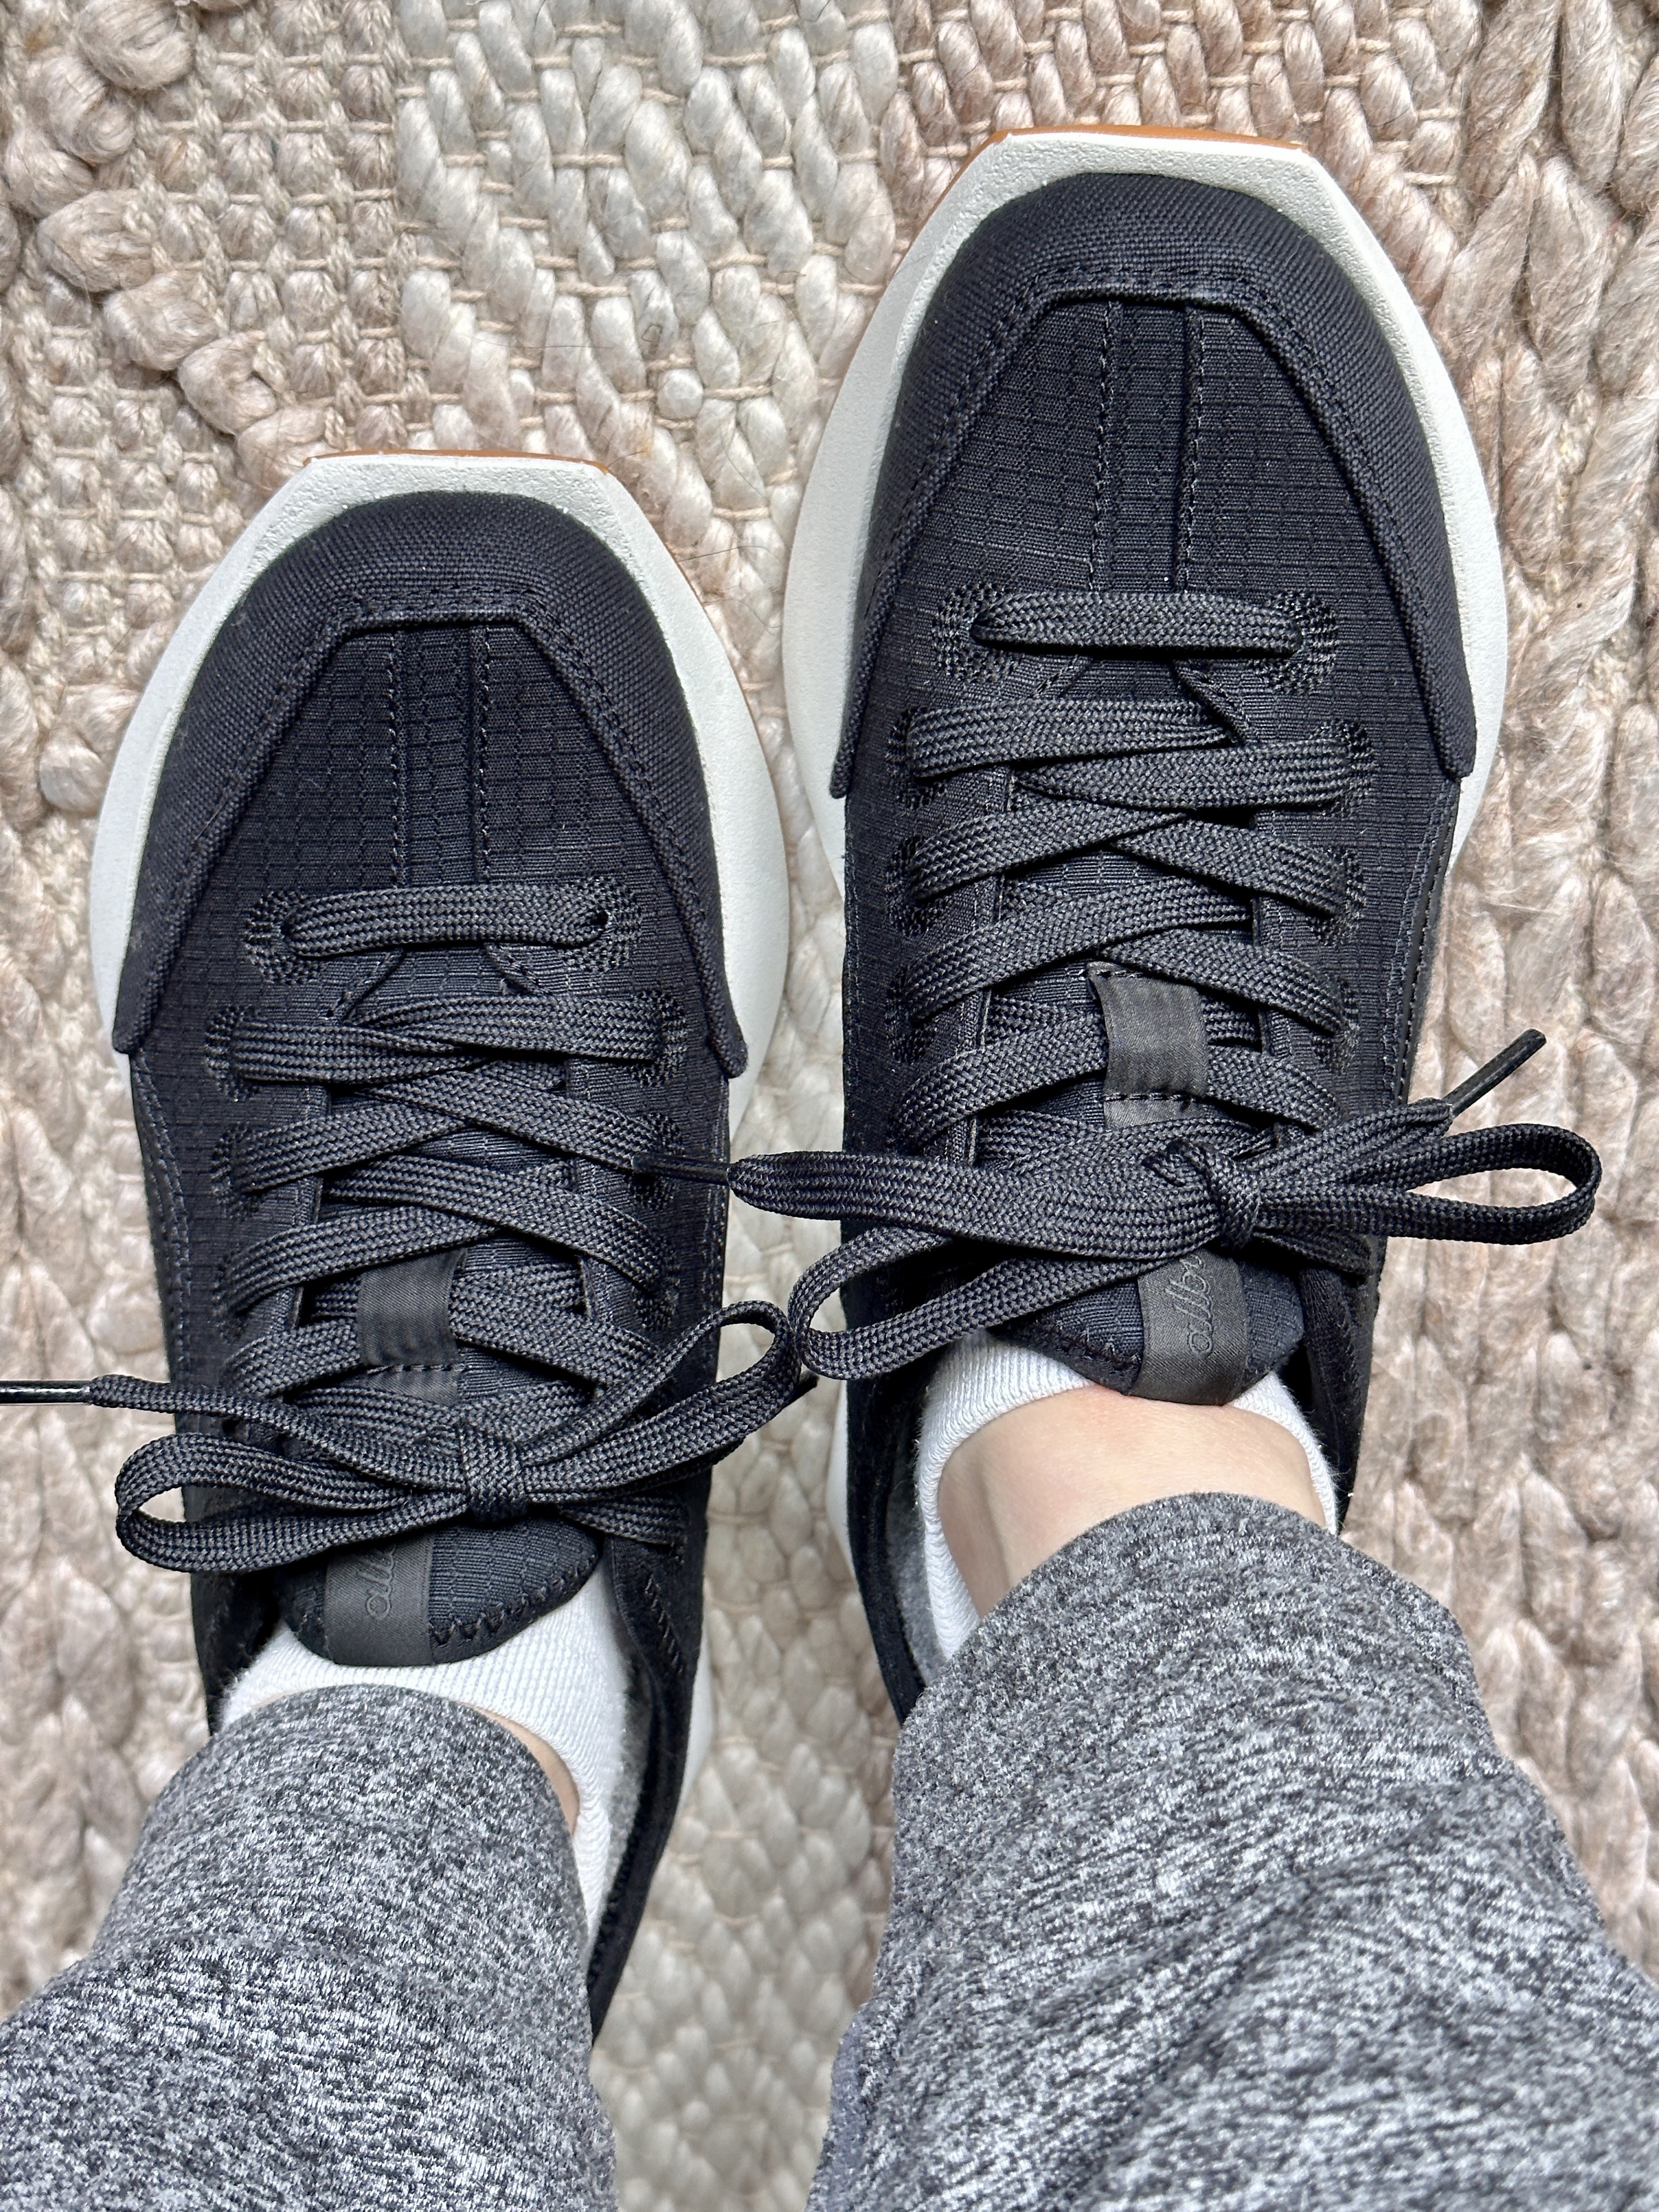 LV Maxi Trainer Sneaker Black/White (Review) + ON FOOT 